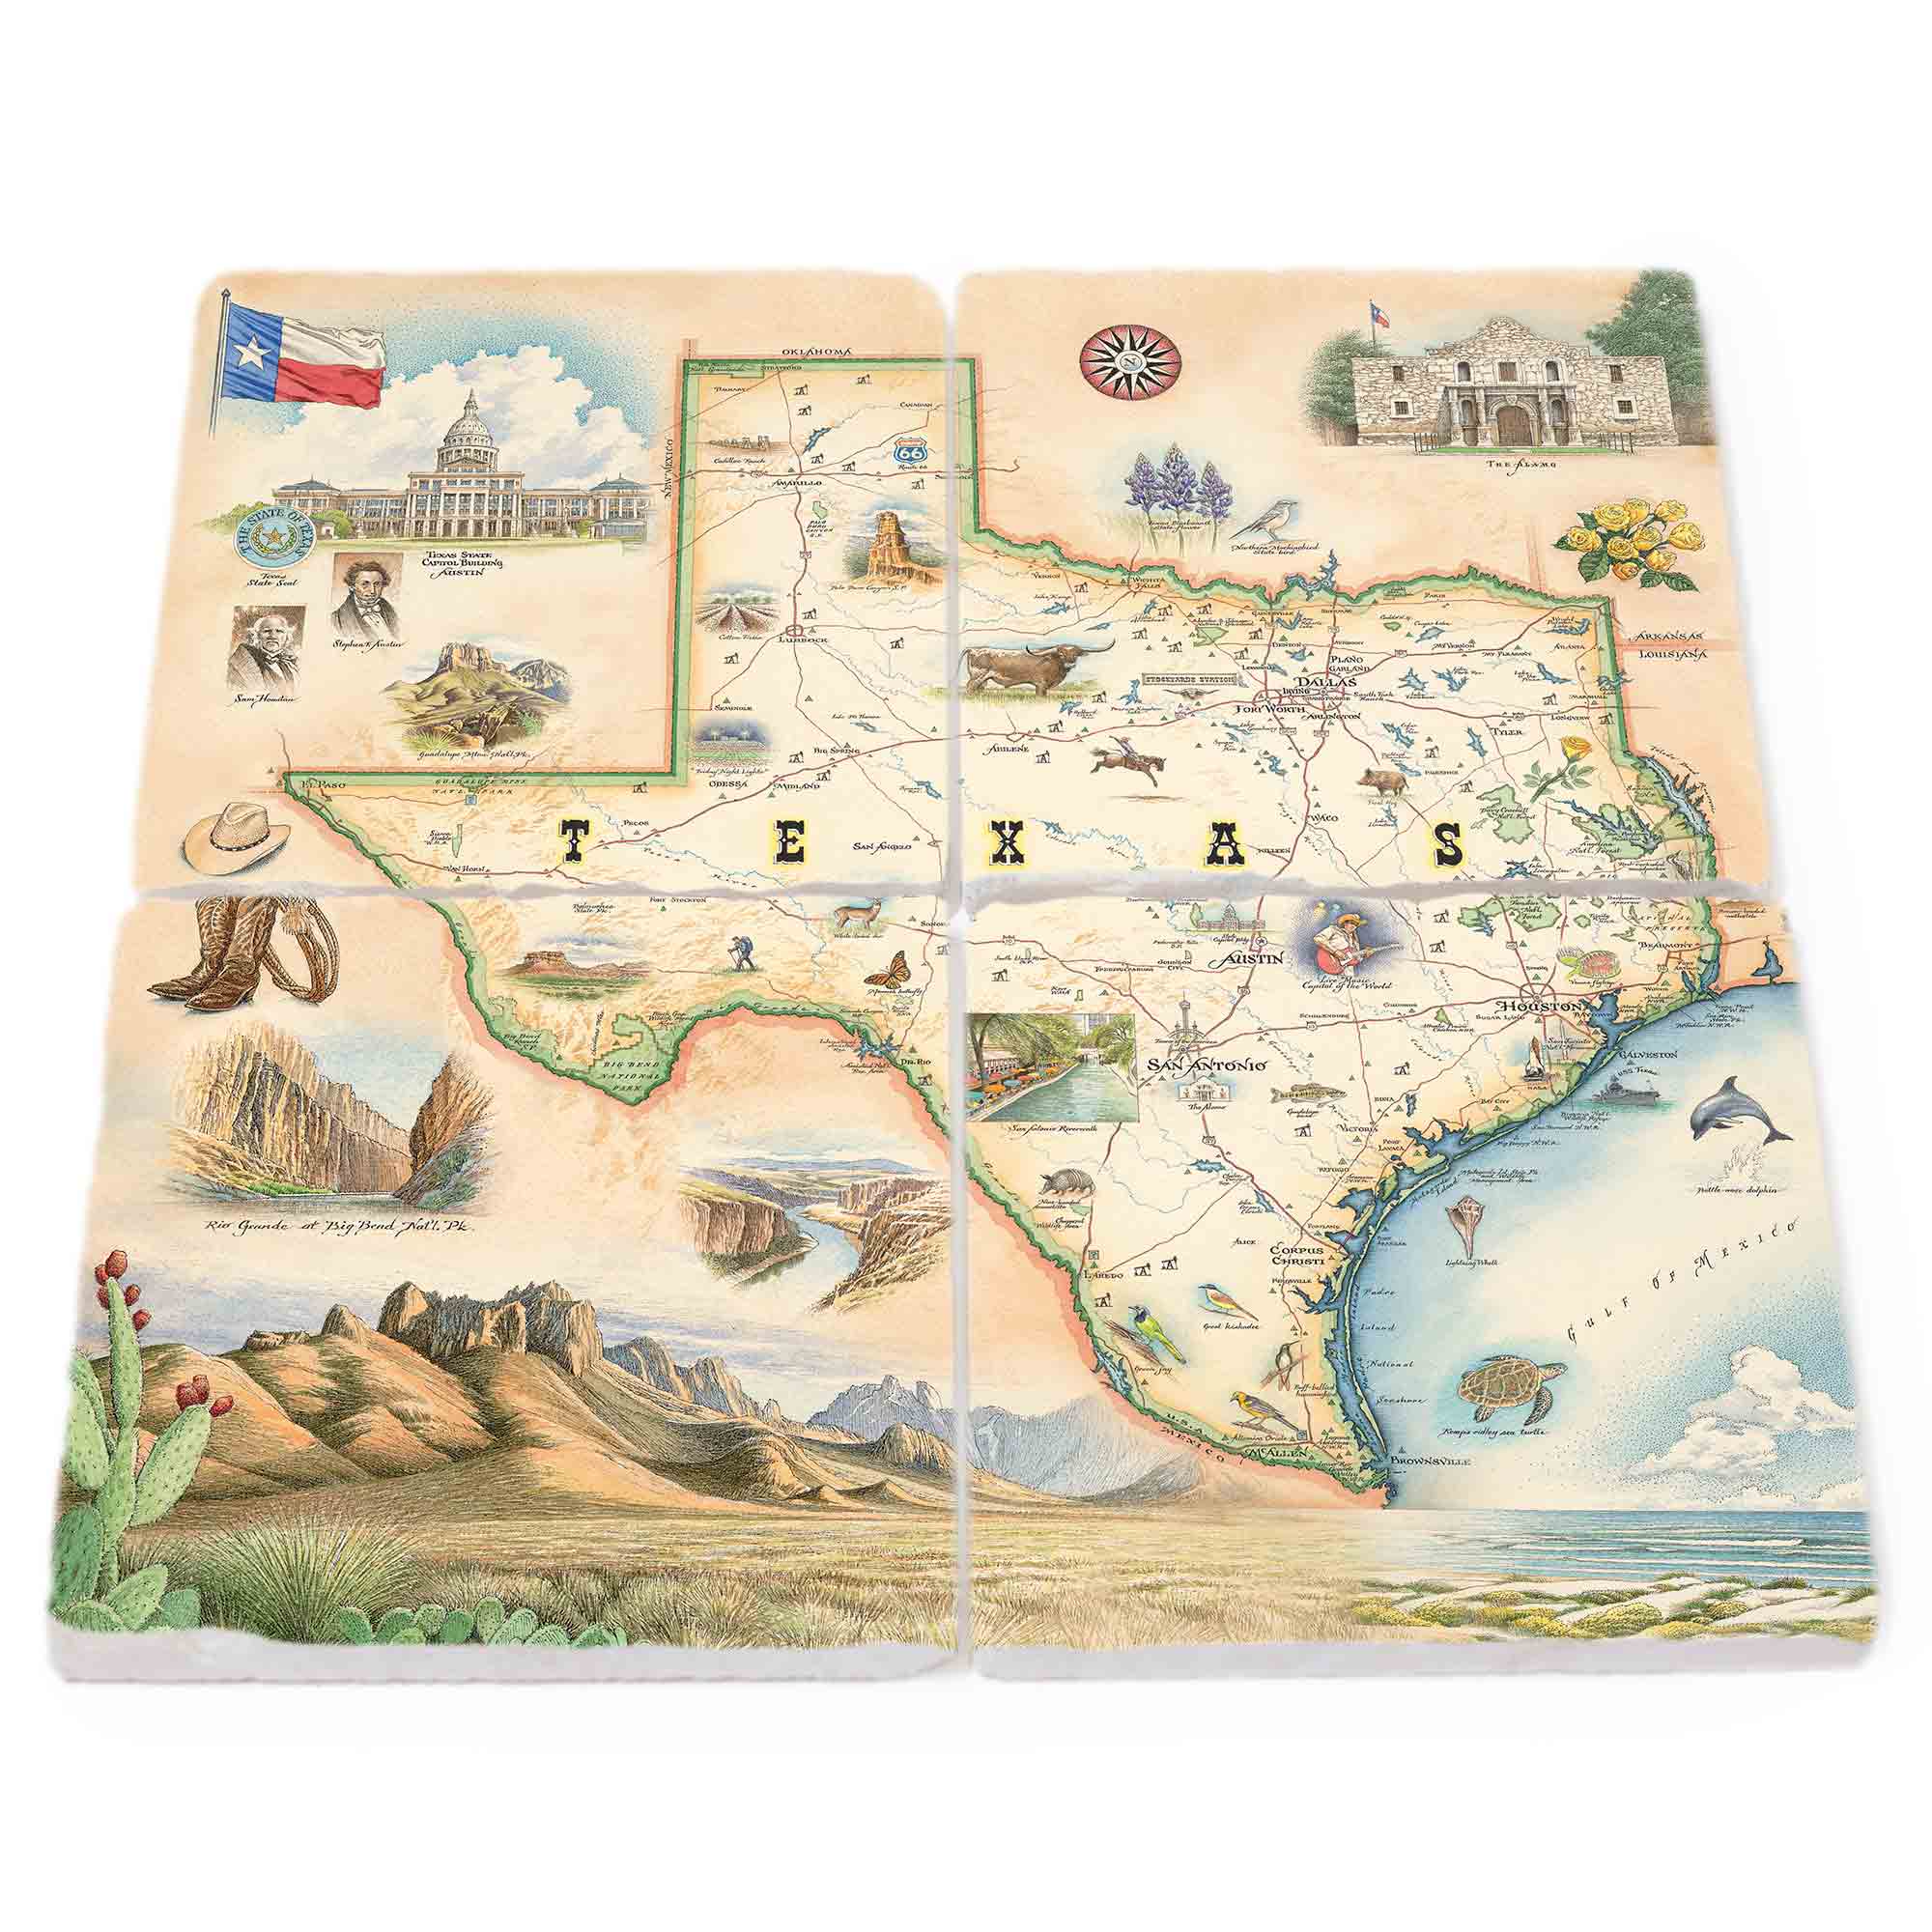 Texas State Map Natural Stone Coasters Set of 4 by Xplorer Maps, a set of four coasters forming the map of the Texas. Illustrations feature key landmarks such as the Alamo, San Antonio Riverwalk, and Guadalupe National Park. The set also includes depictions of local flora and fauna, showcasing Venus flytraps, longhorns, Monarch butterflies, and armadillos.